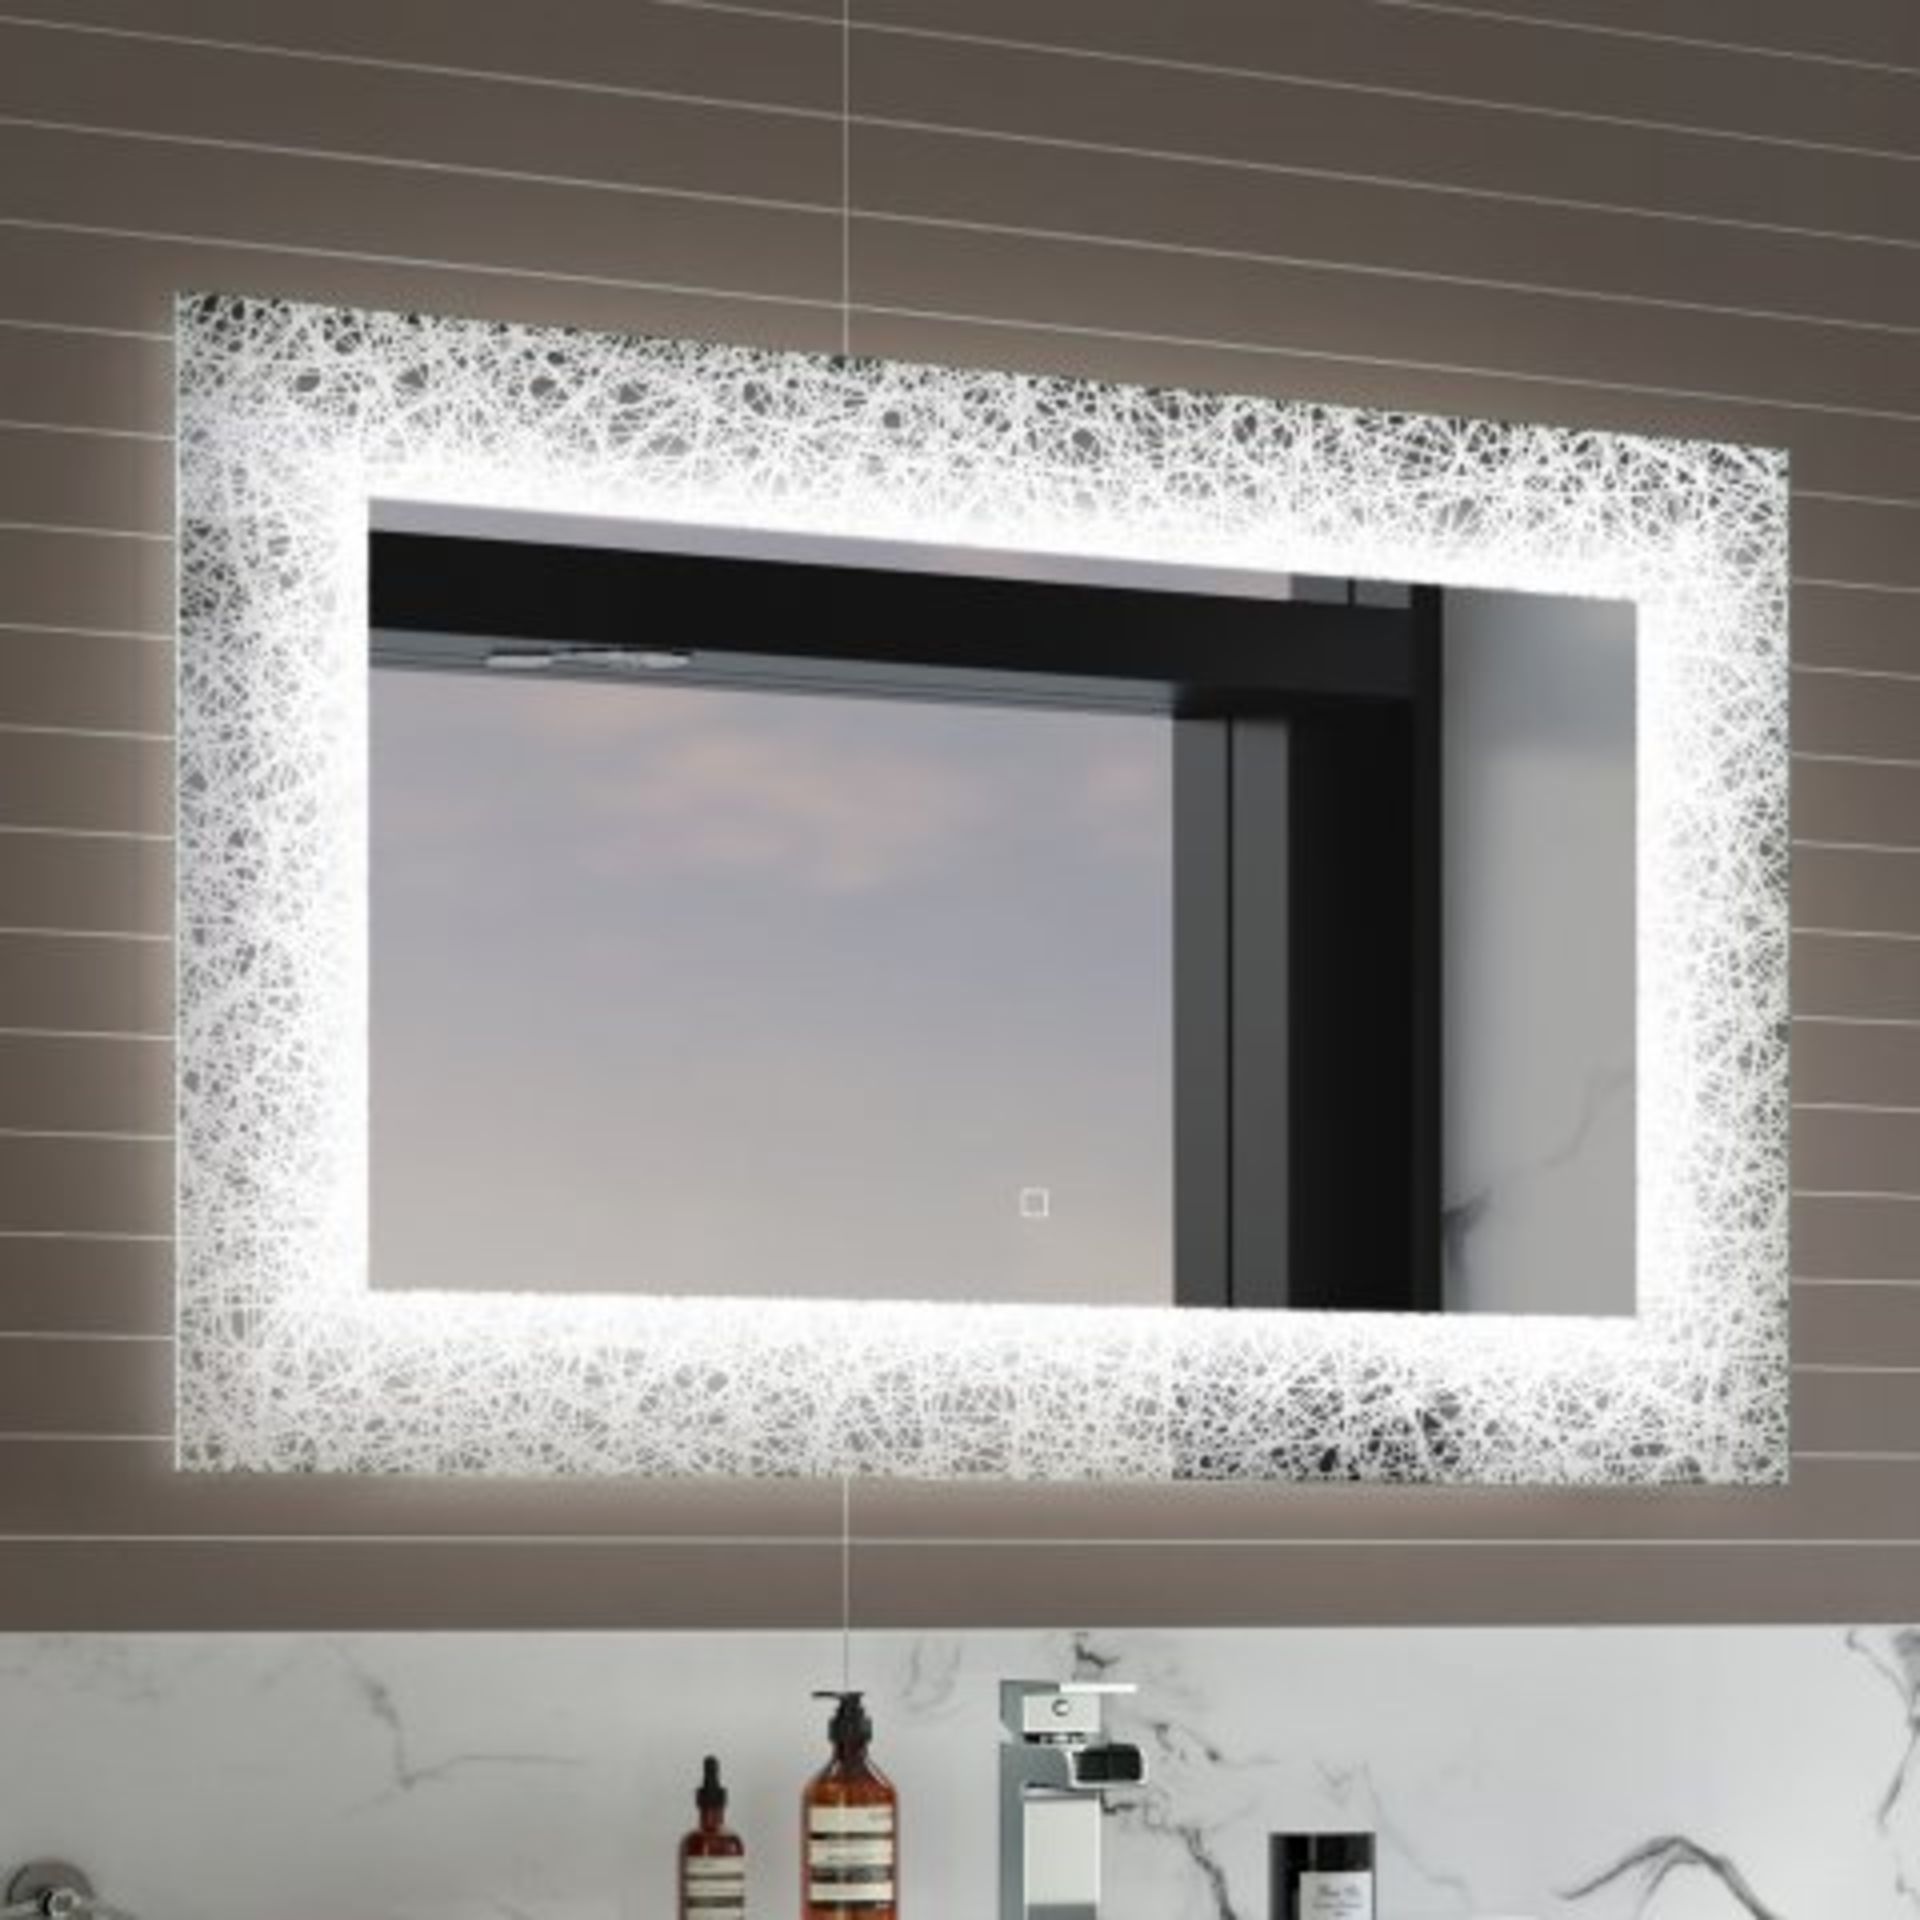 (M2) 600x900mm Galactic Designer Illuminated LED Mirror - Switch Control Light up your bathroom with